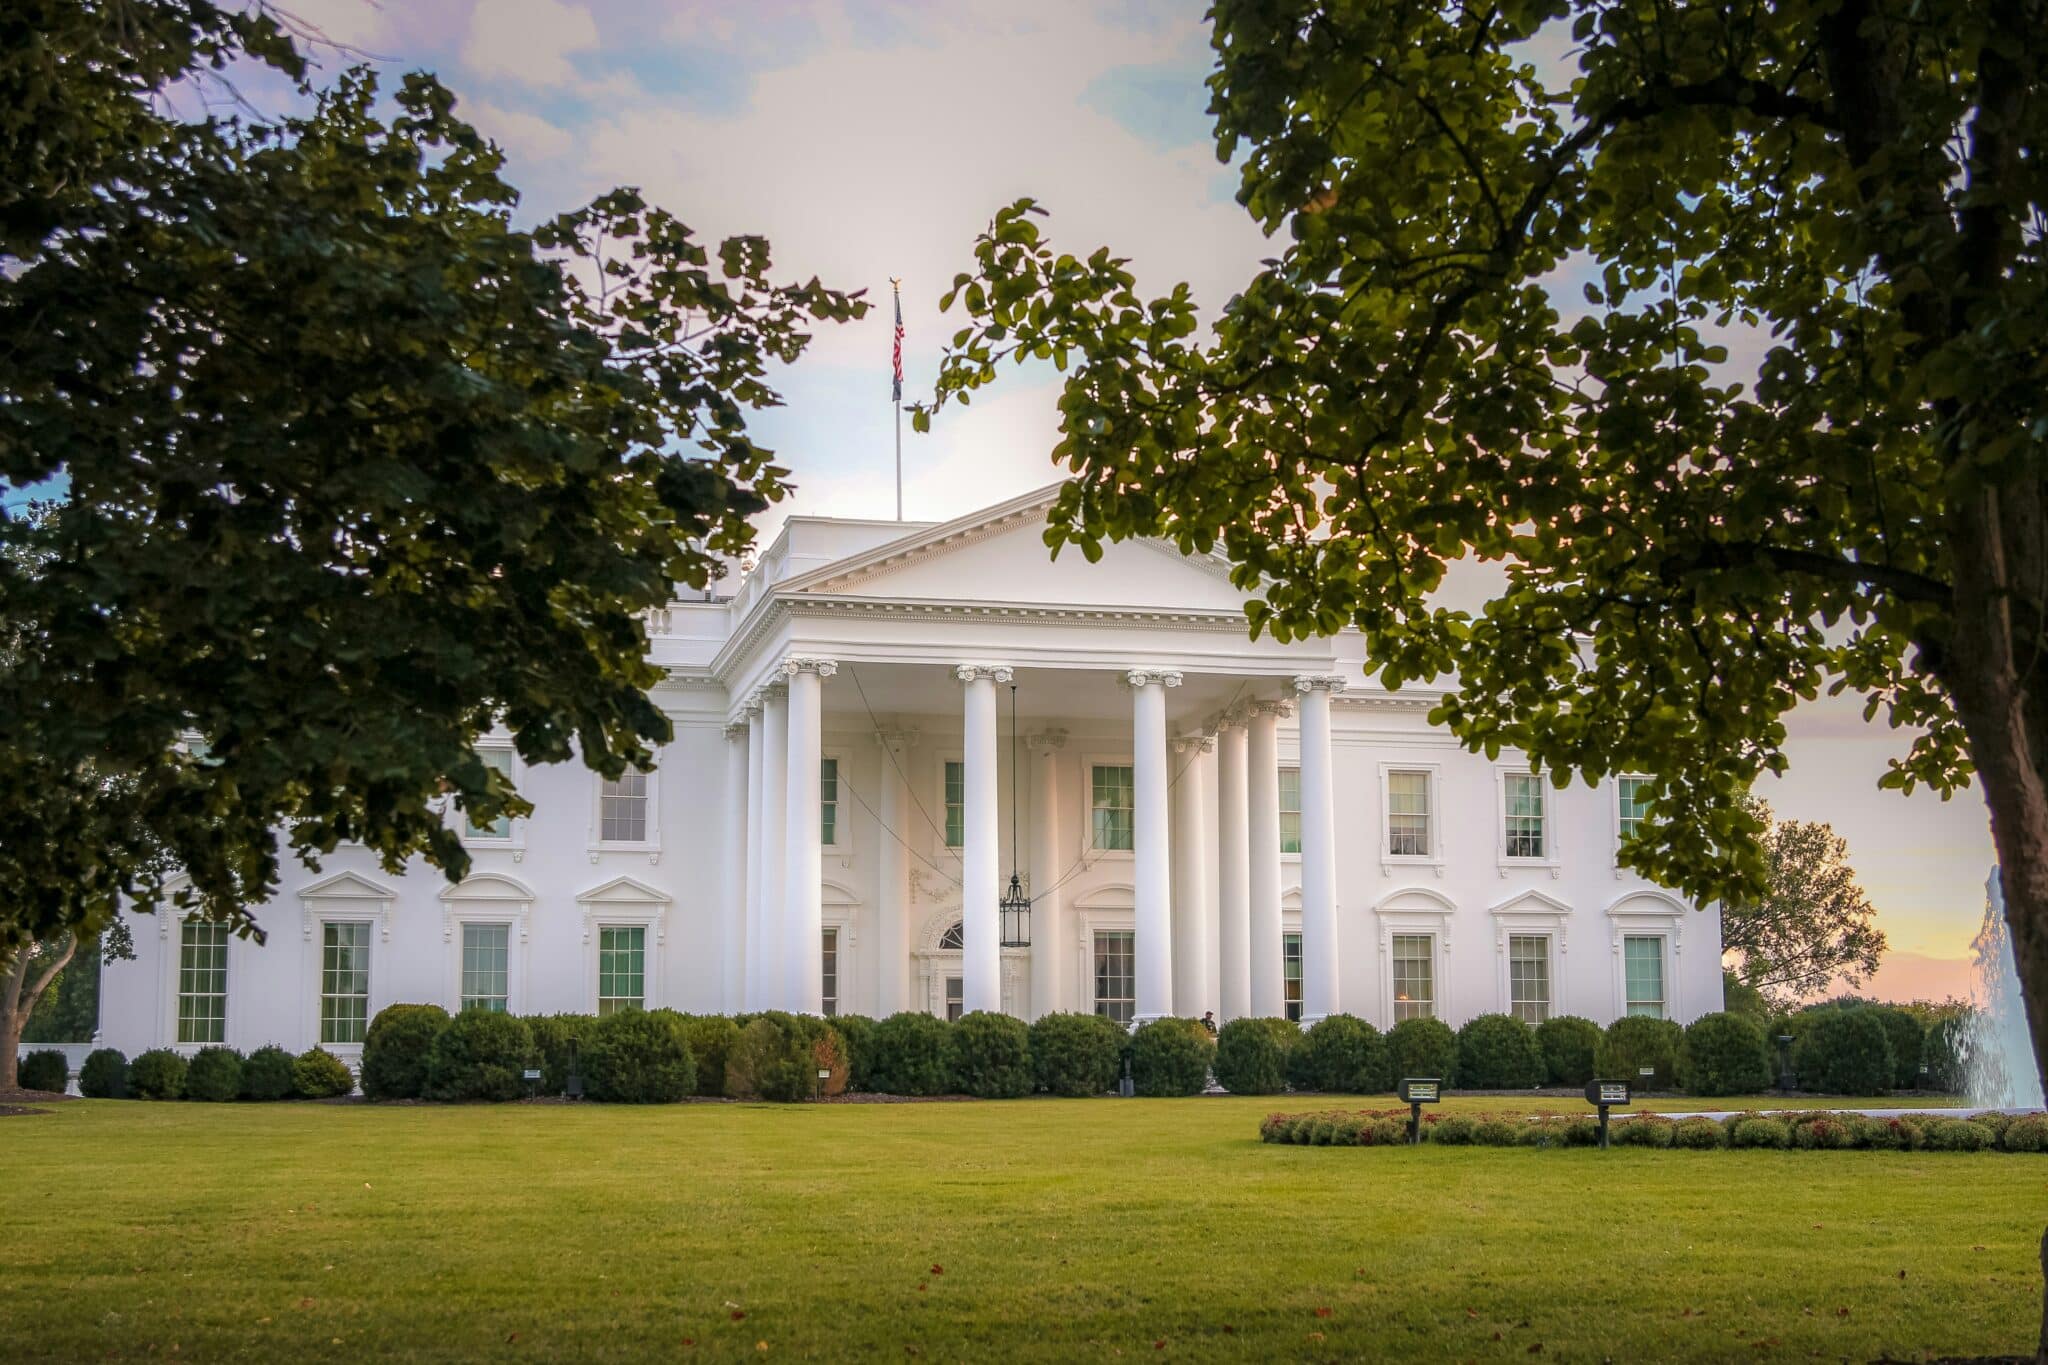 White house front facade at sunset with a vignette of foliage in the foreground